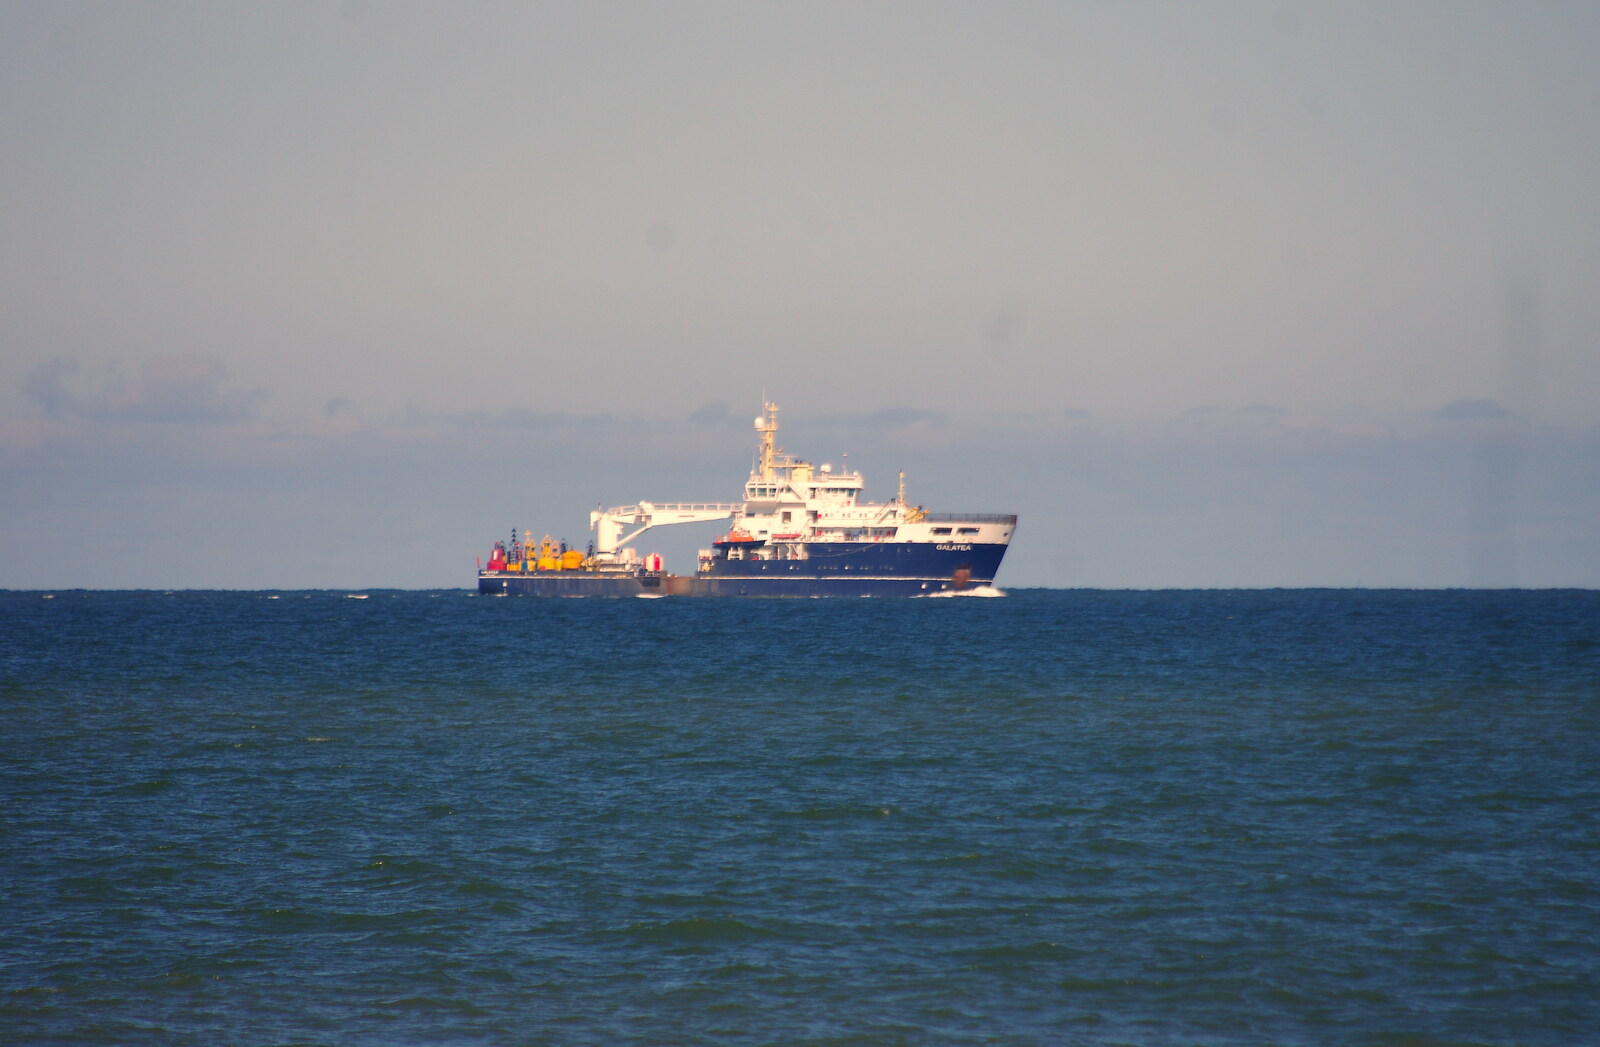 The buoy-laying vessel Galatea drifts by from A Trip to Waxham Sands,  Horsey, Norfolk - 27th August 2016